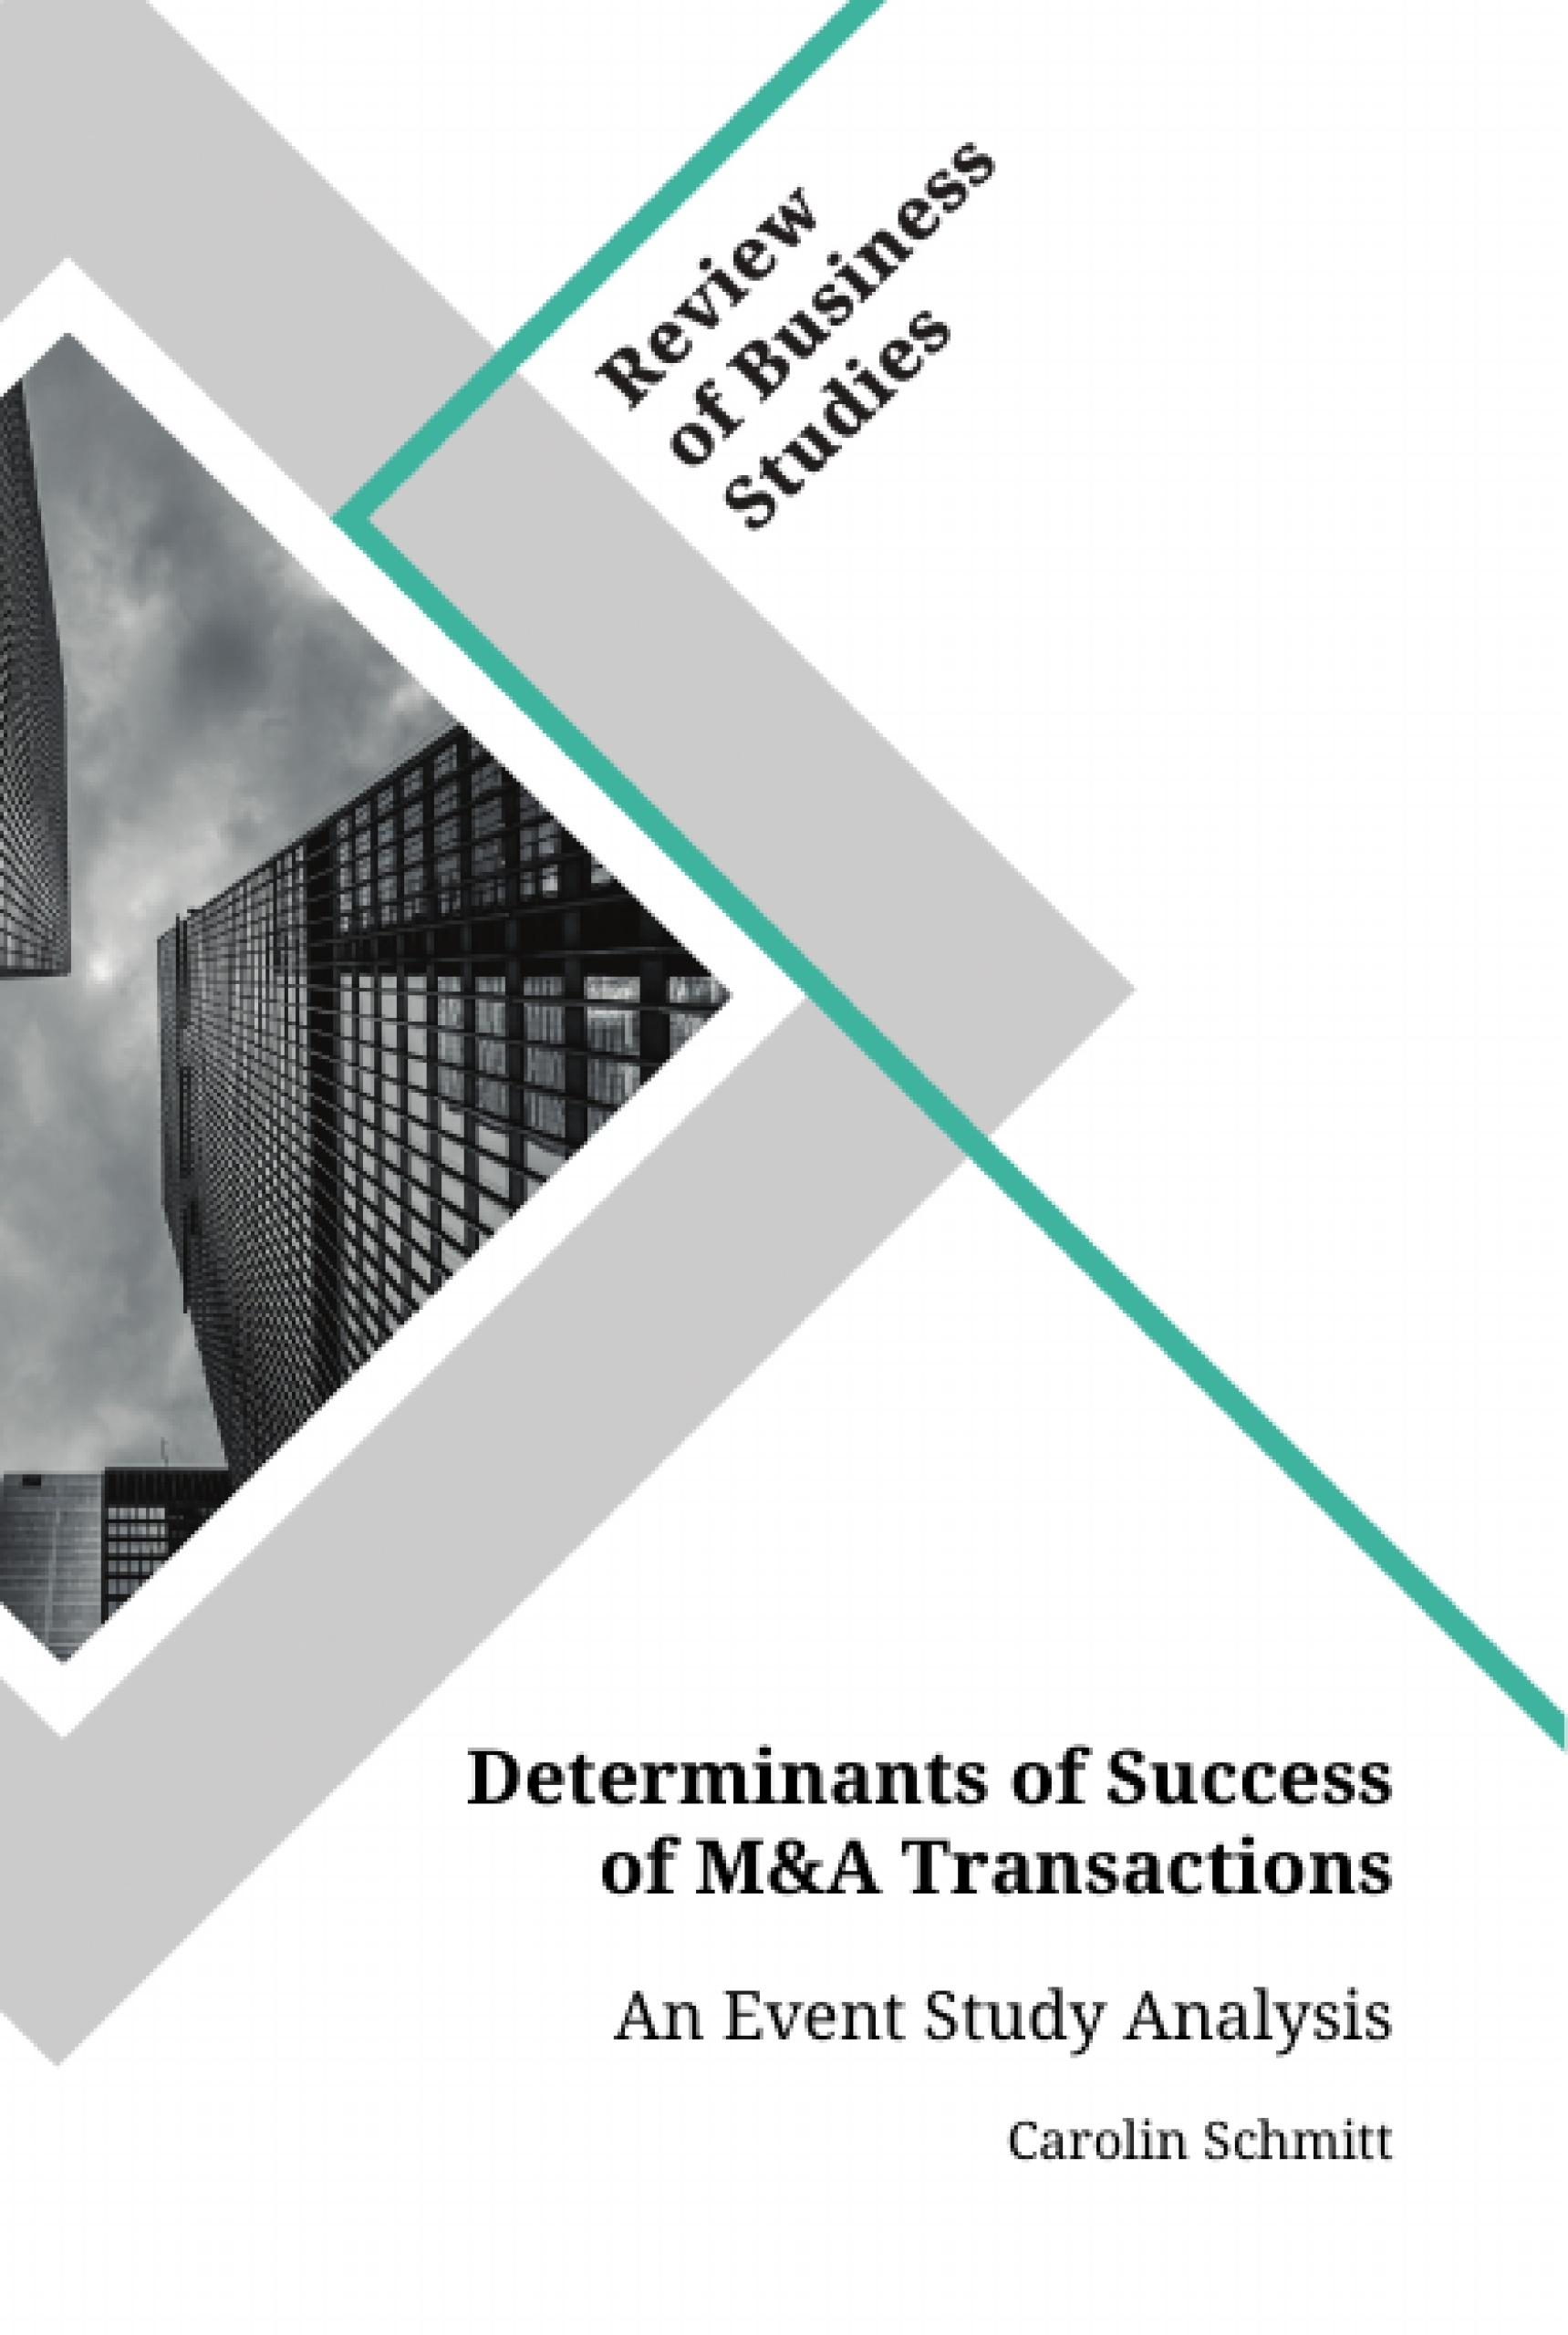 Title: Determinants of Success of M&A Transactions